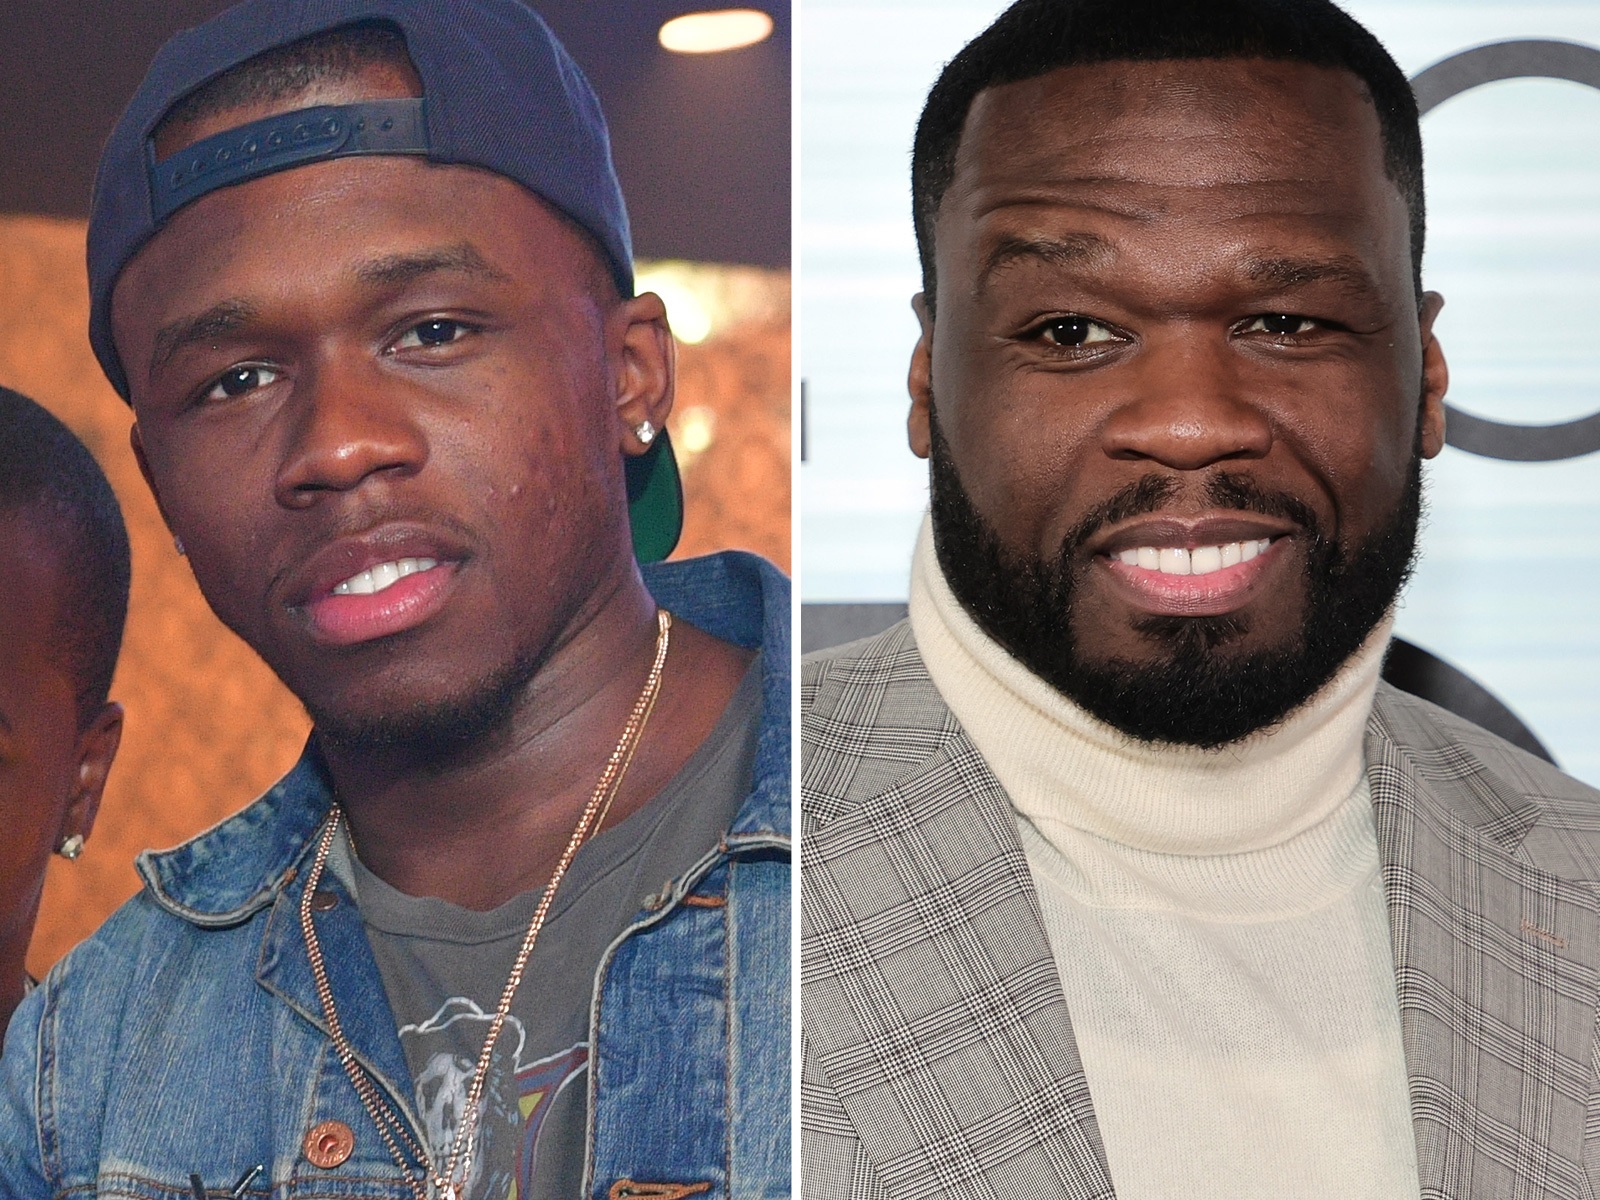 50 Cent's son Marquise Jackson offers him $6,700 for a day of his time amid ongoing feud